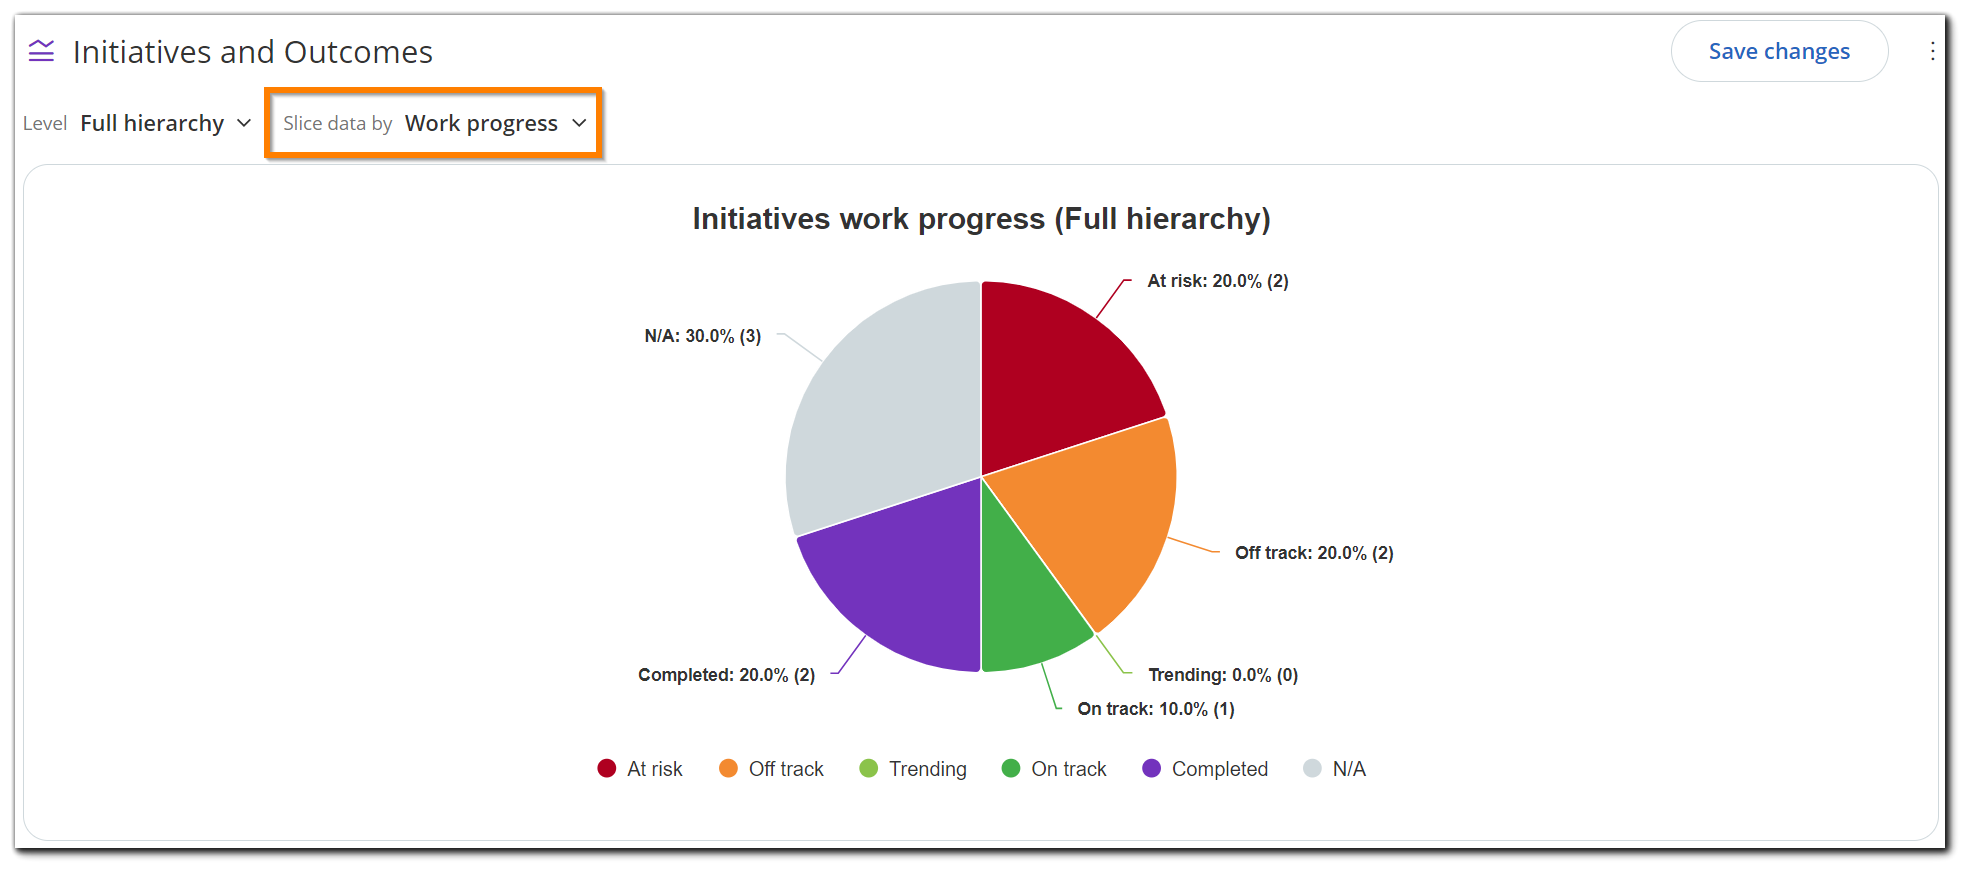 initiatives-and-outcomes-pie-charts-work-progress.png